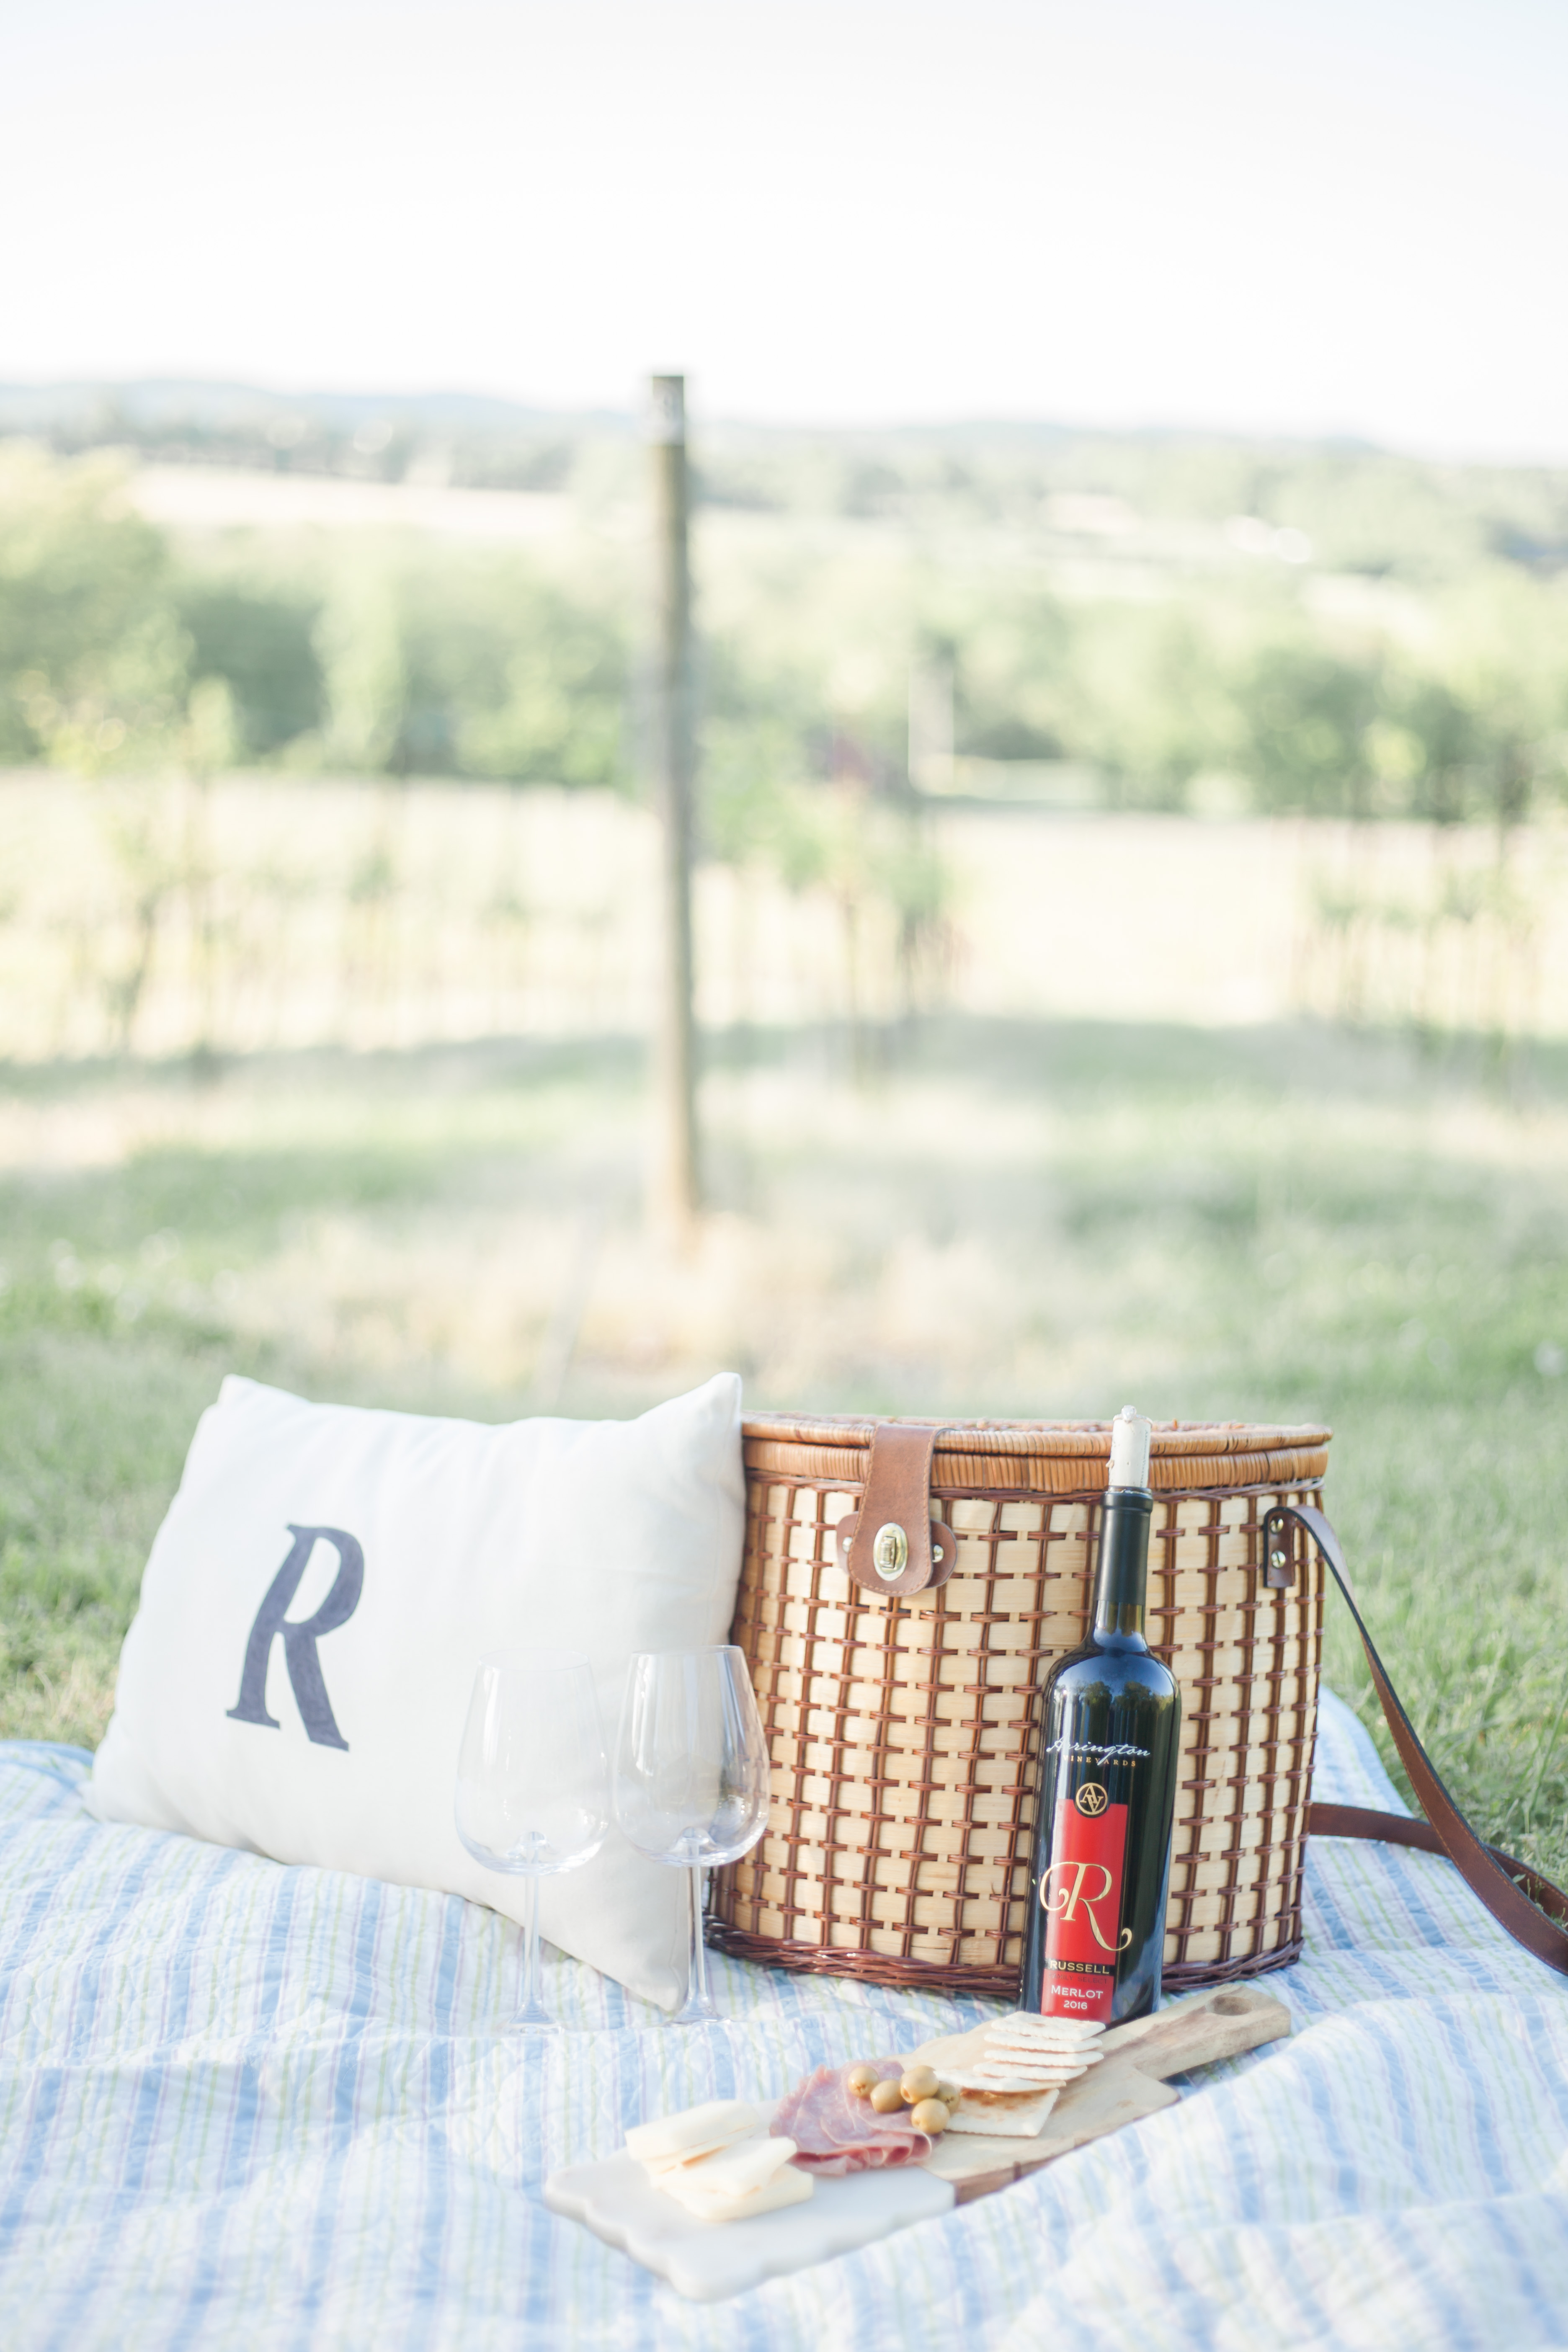 R monogrammed pillow and wine bottle with picnic basket